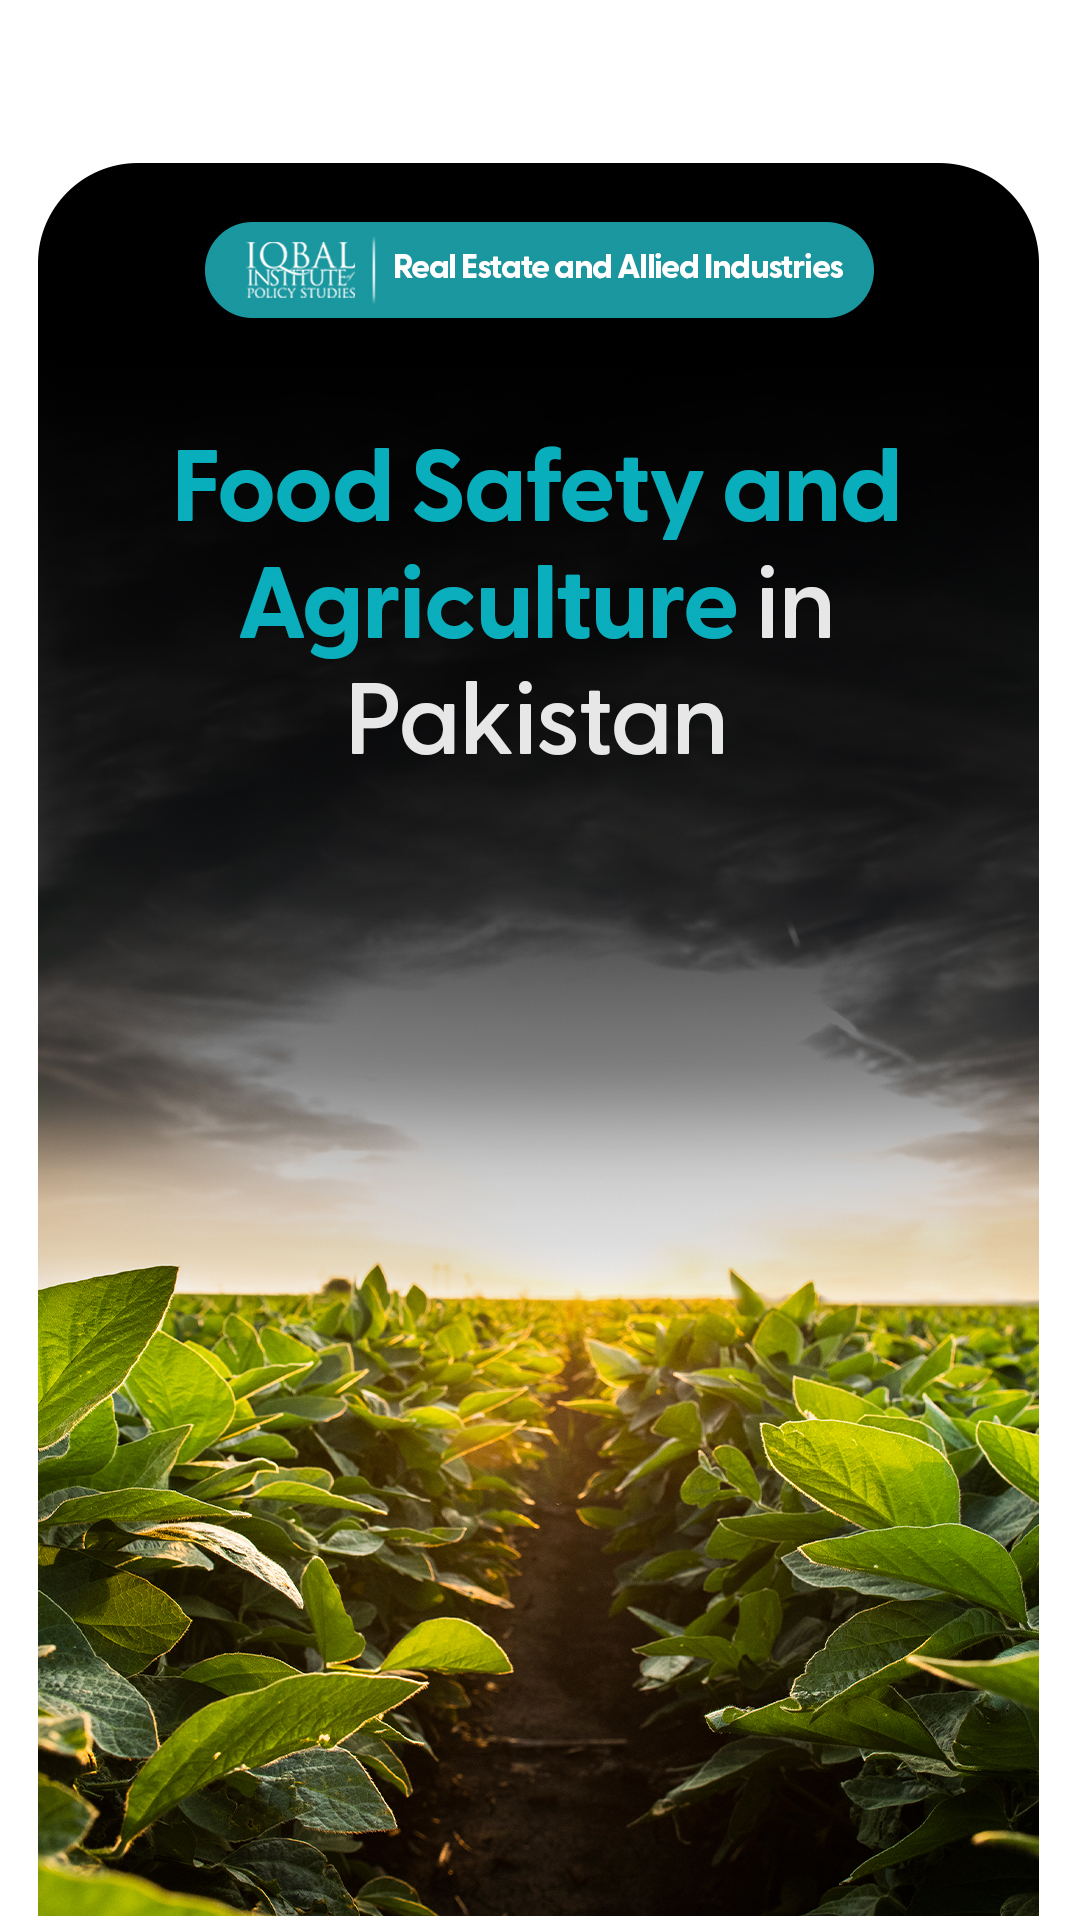 food safety and agriculture in Pakistan